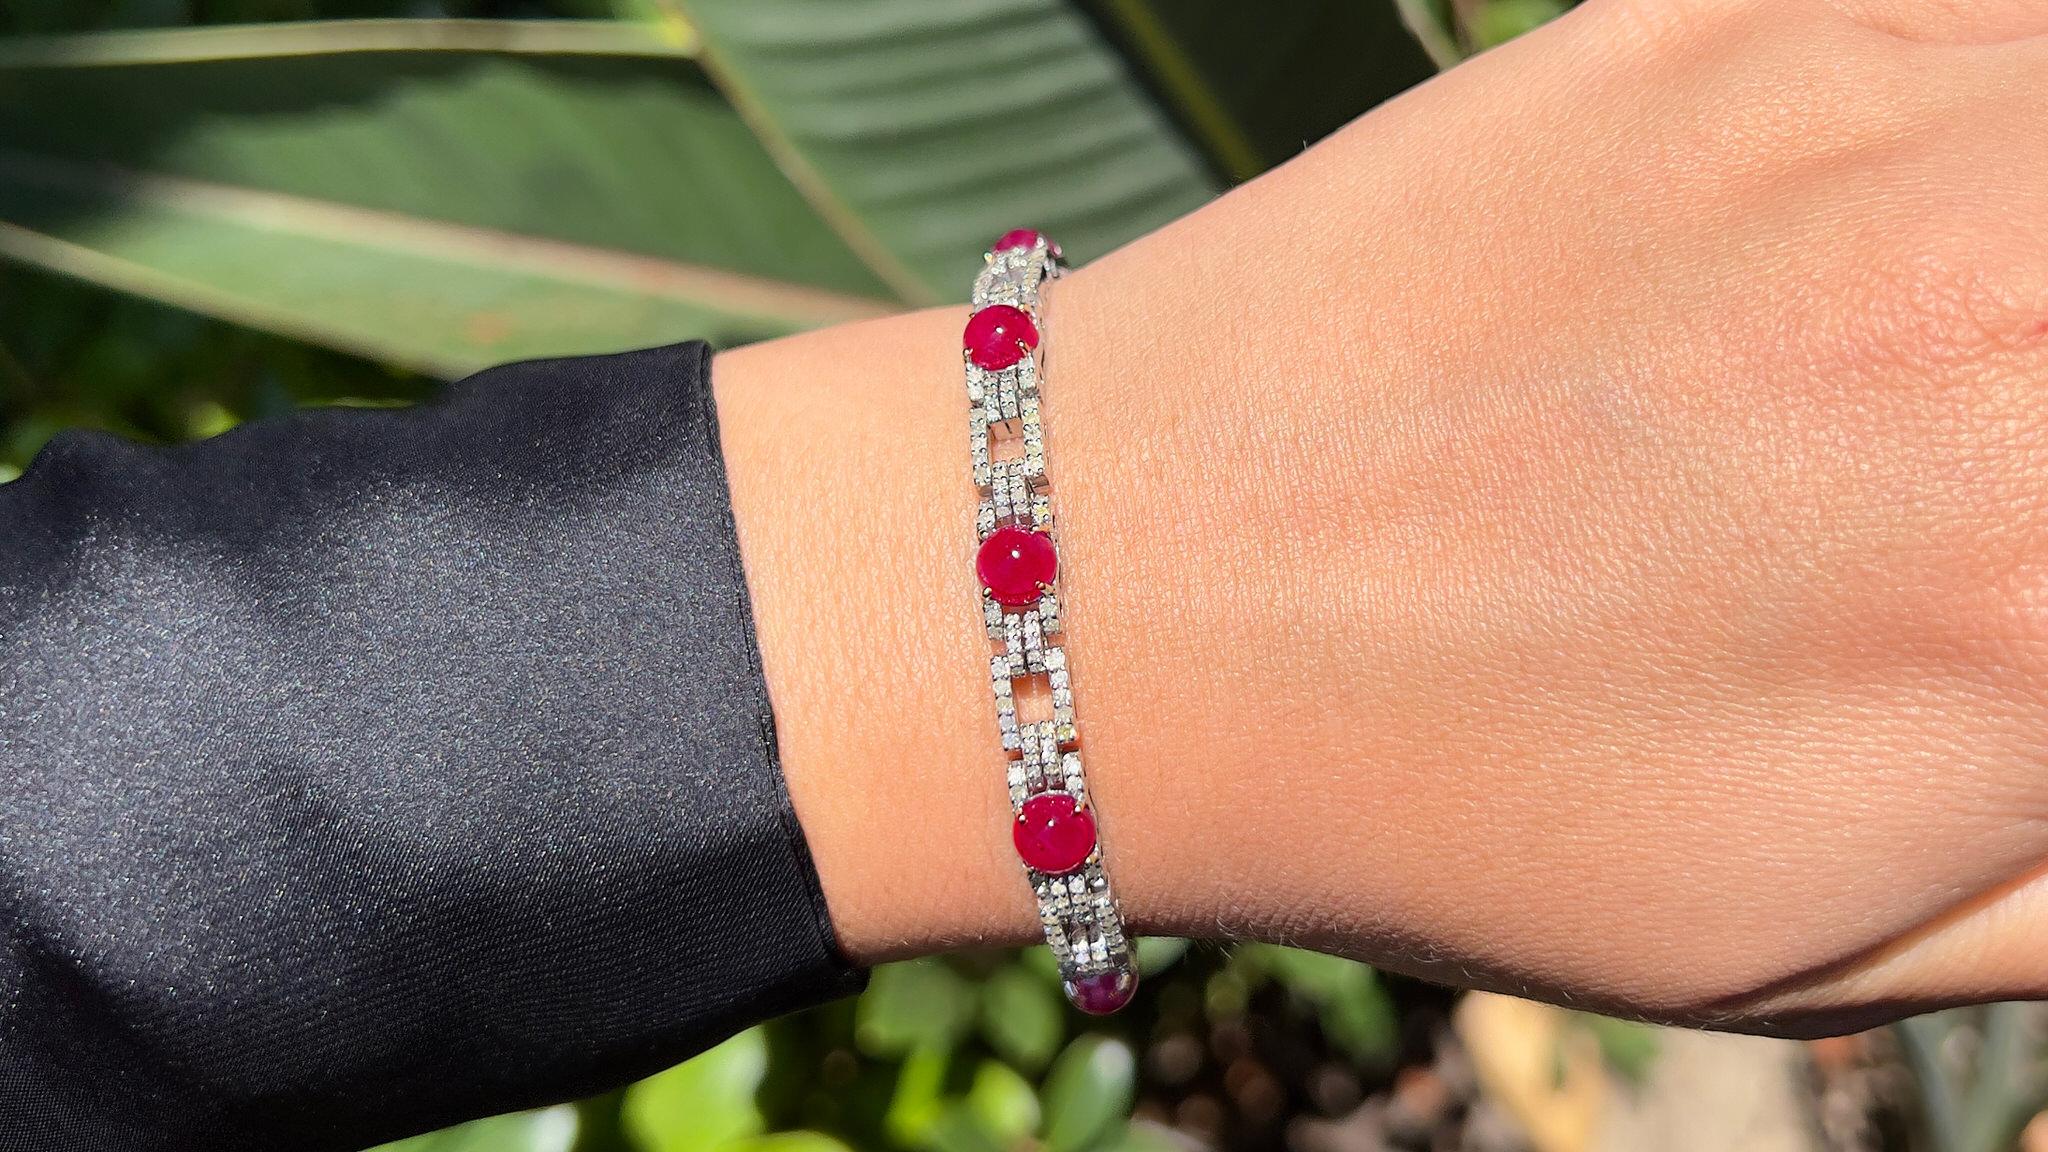 It comes with the Gemological Appraisal by GIA GG/AJP
All Gemstones are Natural
Rubies = 13.38 Carats
Cut: Cabochon
Diamonds = 4.65 Carats
Color: H-M, Clarity: VS-SI
Metal: 14K Gold & Silver
Bracelet Length: 7 Inches